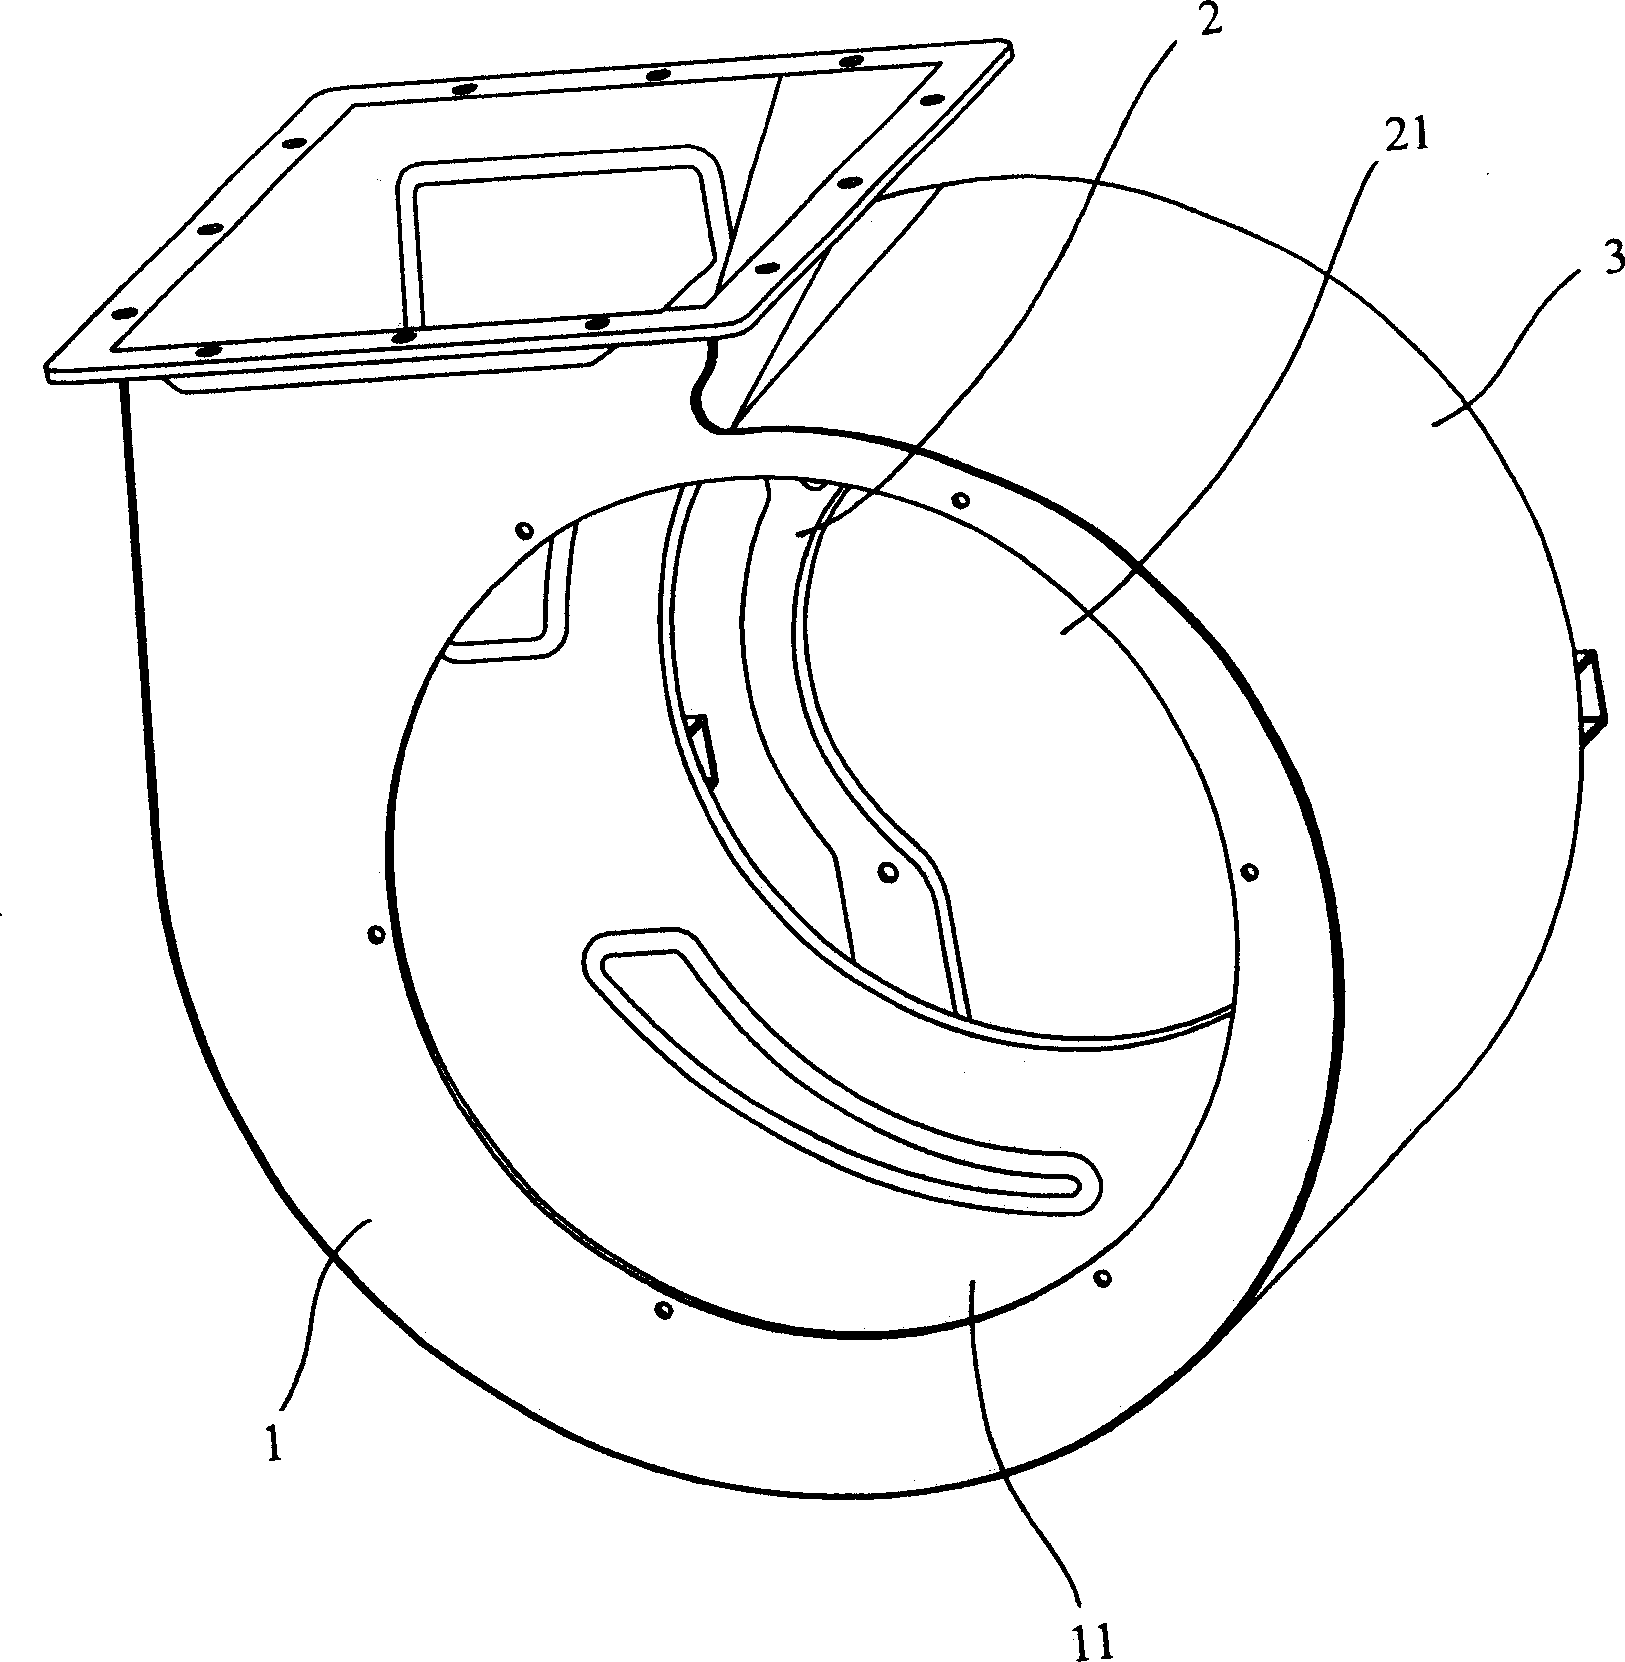 Fan volute structure with air inlets on double sides for European-style smoke exhaust ventilator